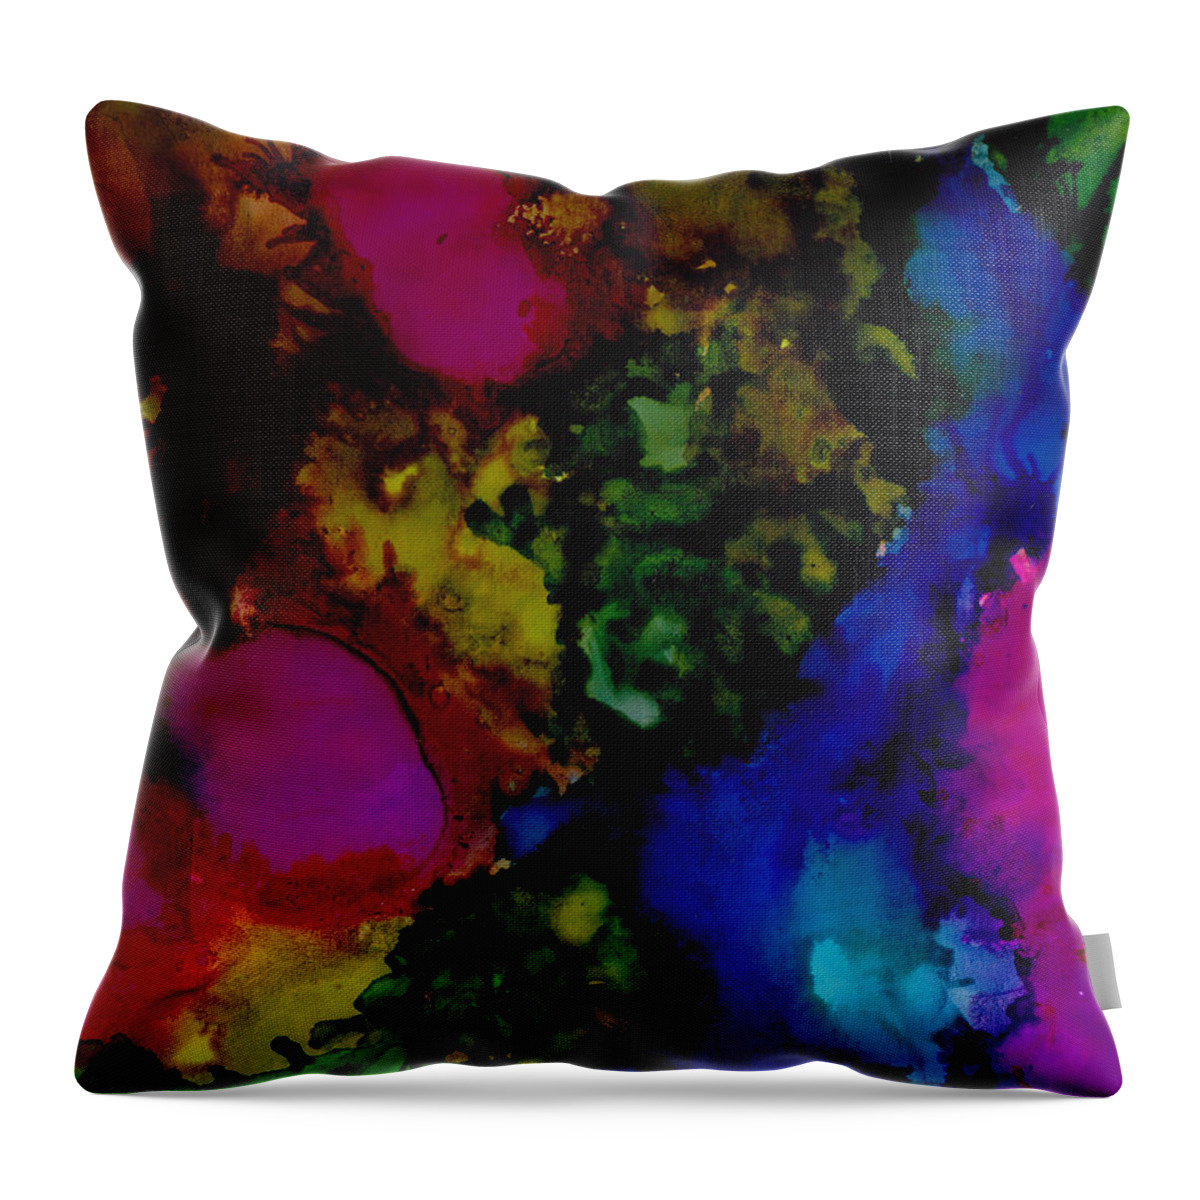 Tropical Throw Pillow featuring the painting Hot Spots by Angela Treat Lyon